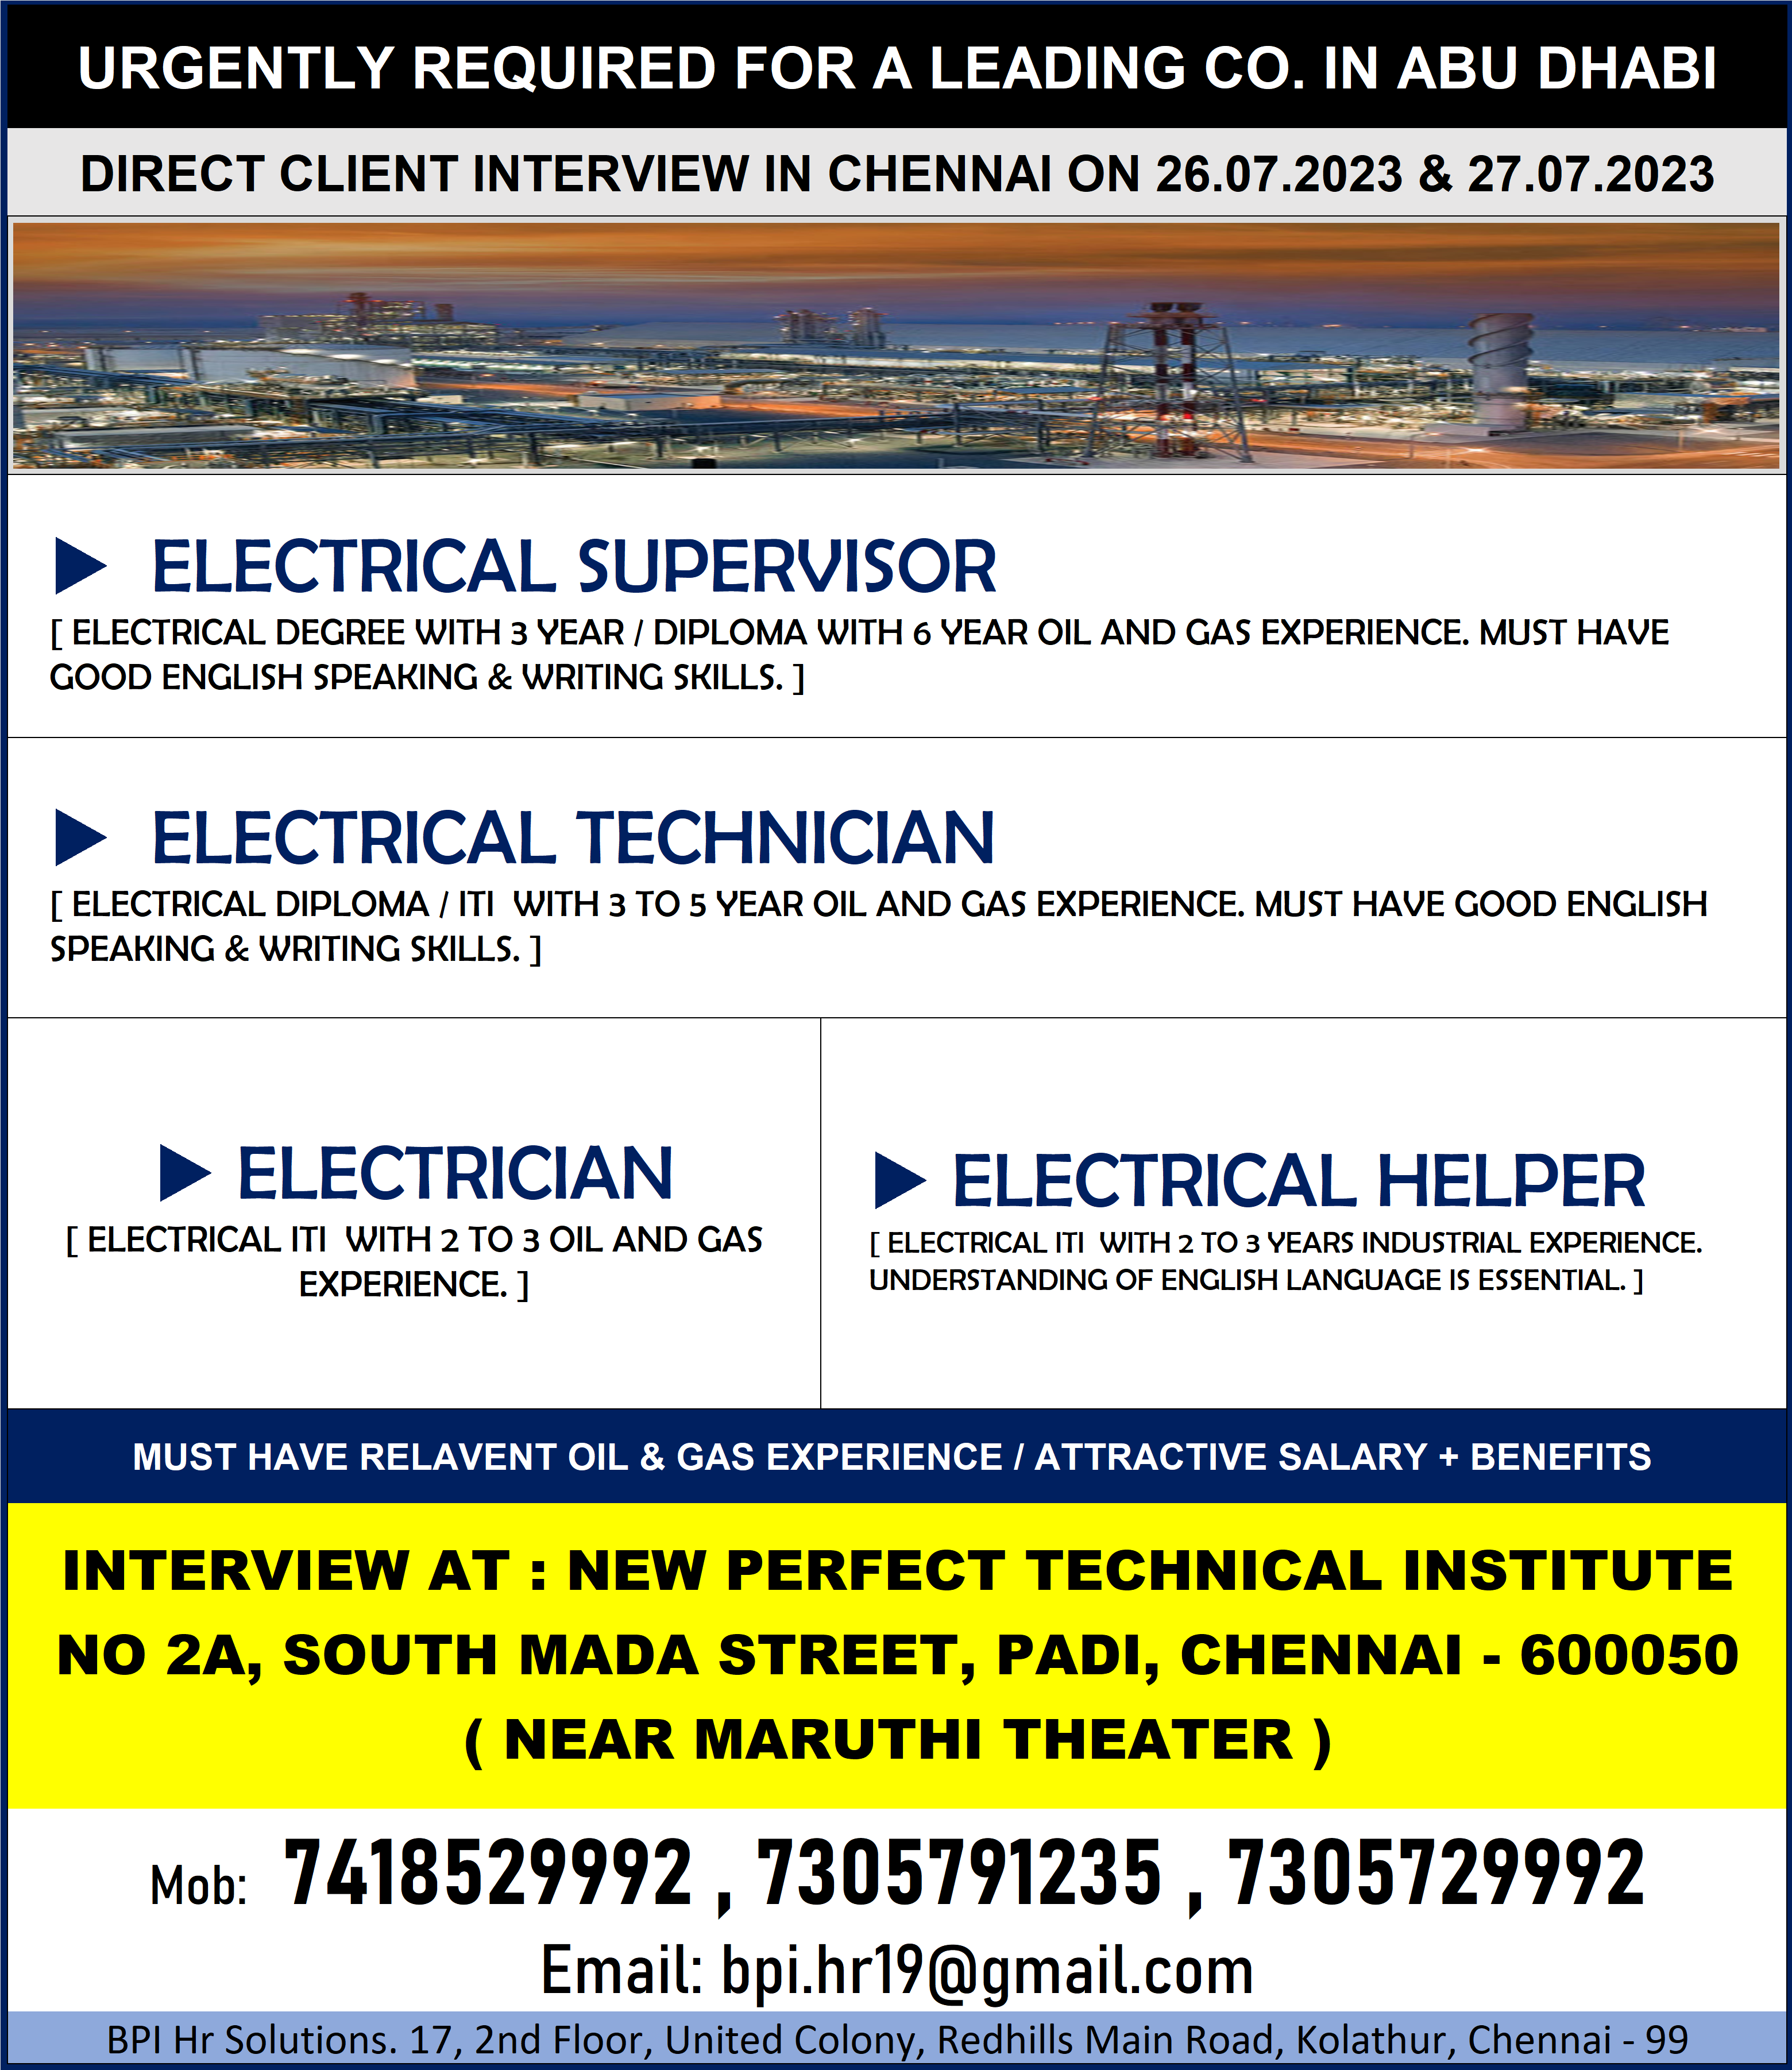 URGENTLY REQUIRED FOR A LEADING CO. IN ABU DHABI DIRECT CLIENT INTERVIEW IN CHENNAI ON 26.07.2023 & 27.07.2023